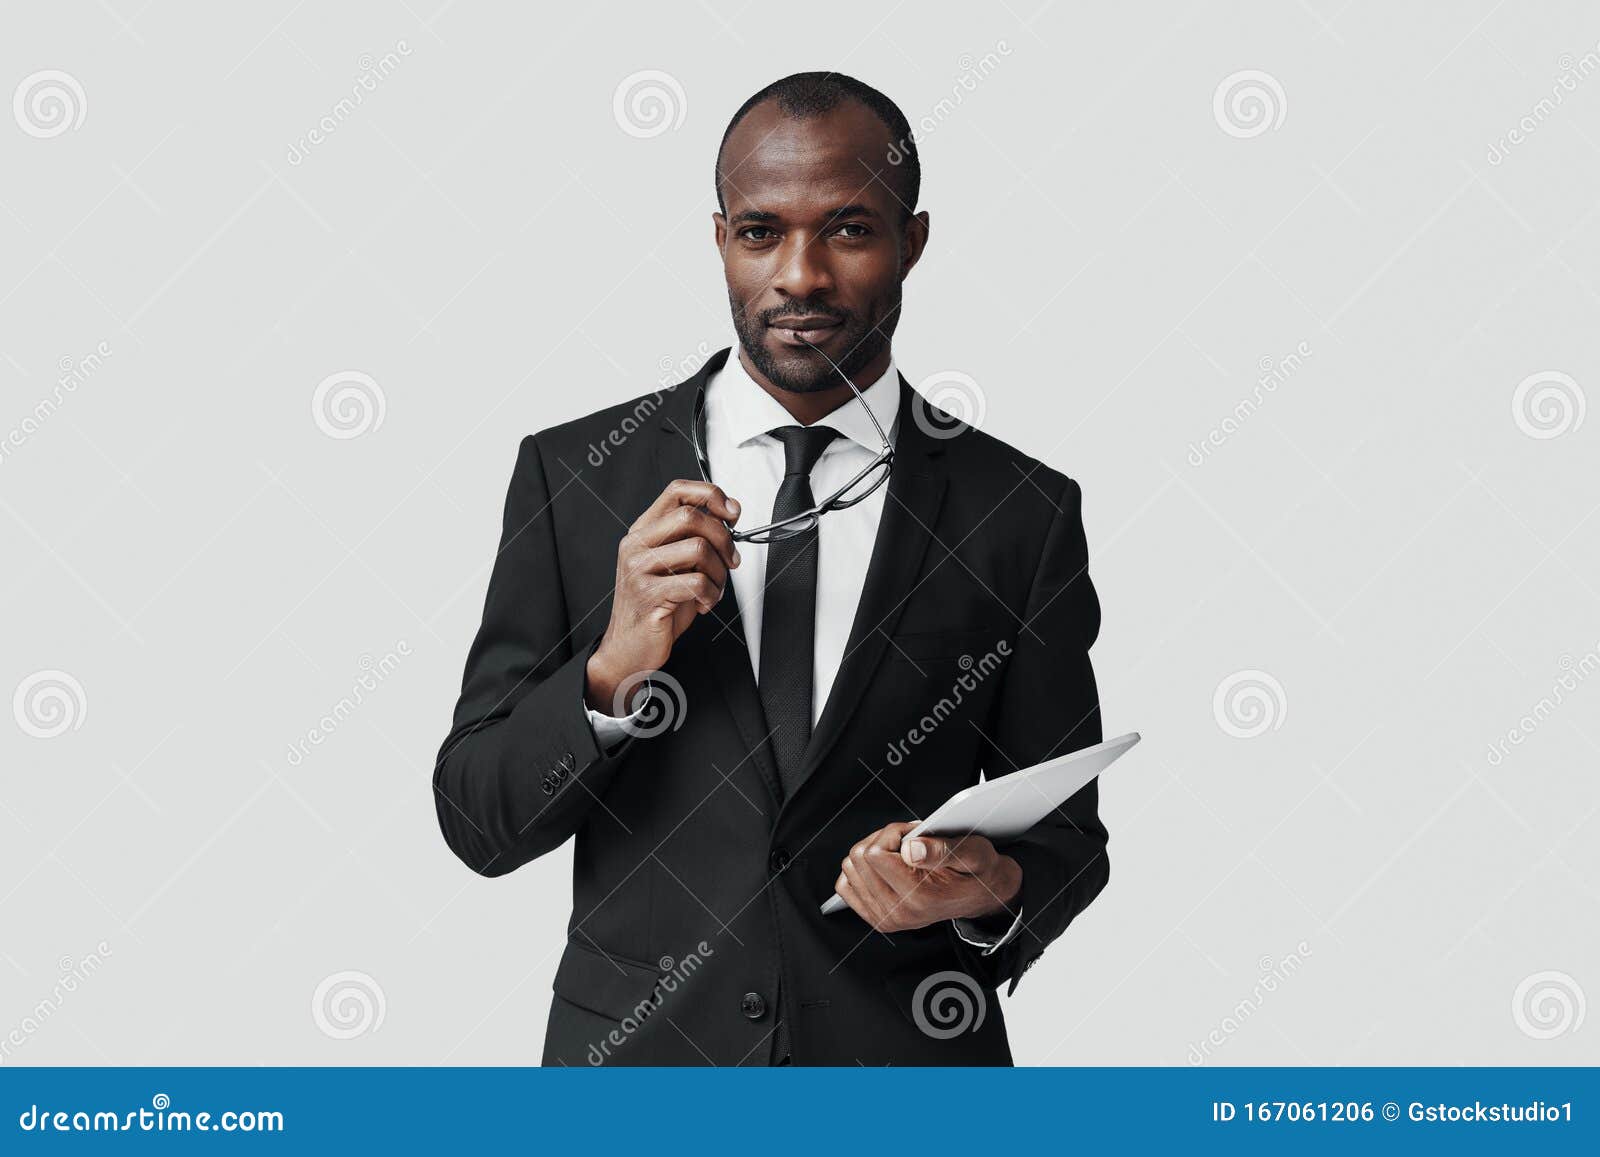 charming young african man in formalwear